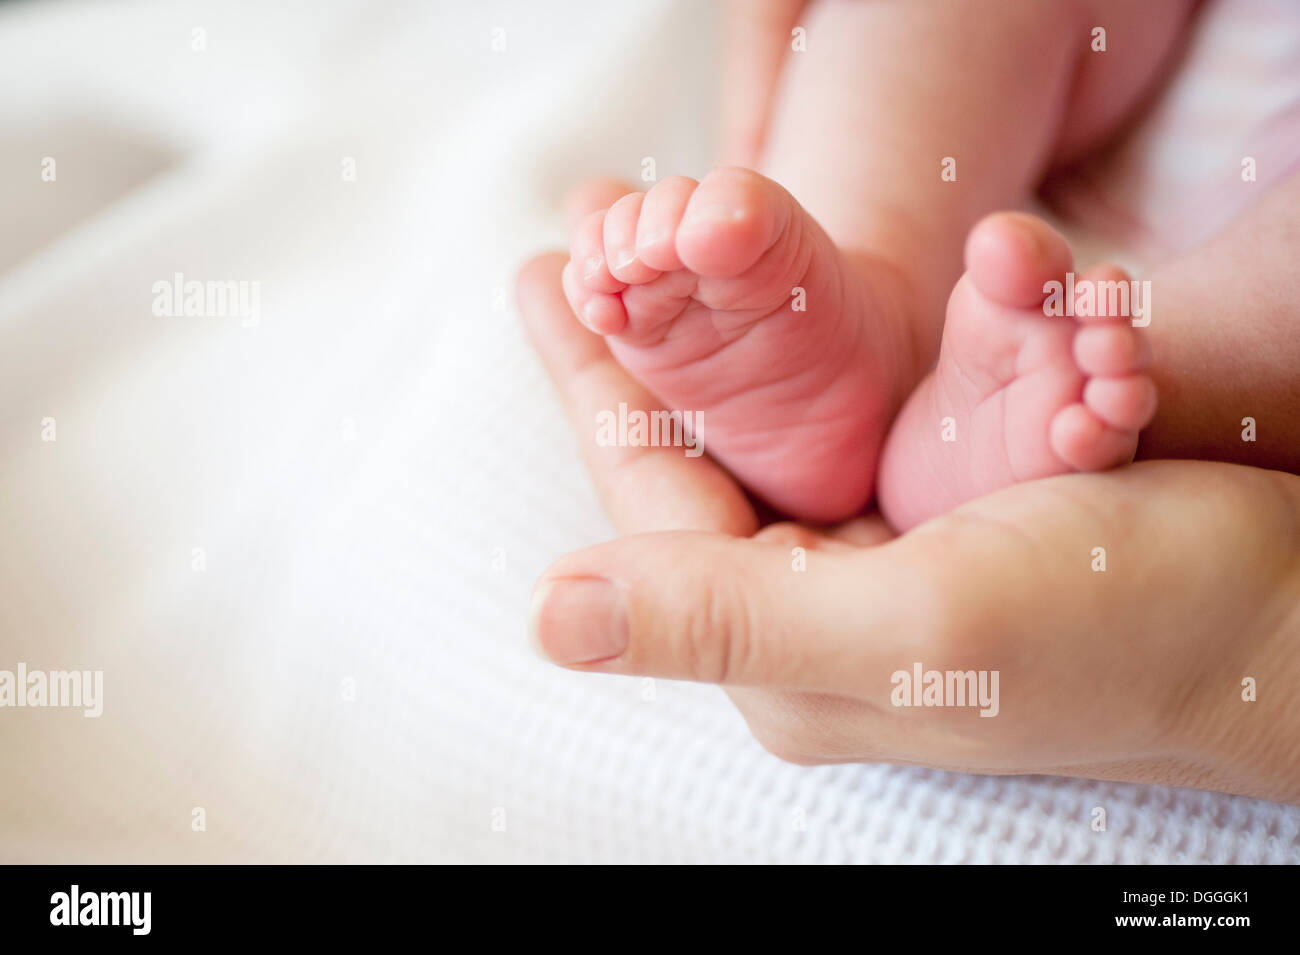 Mid adult woman holding baby girl's feet, close up Stock Photo